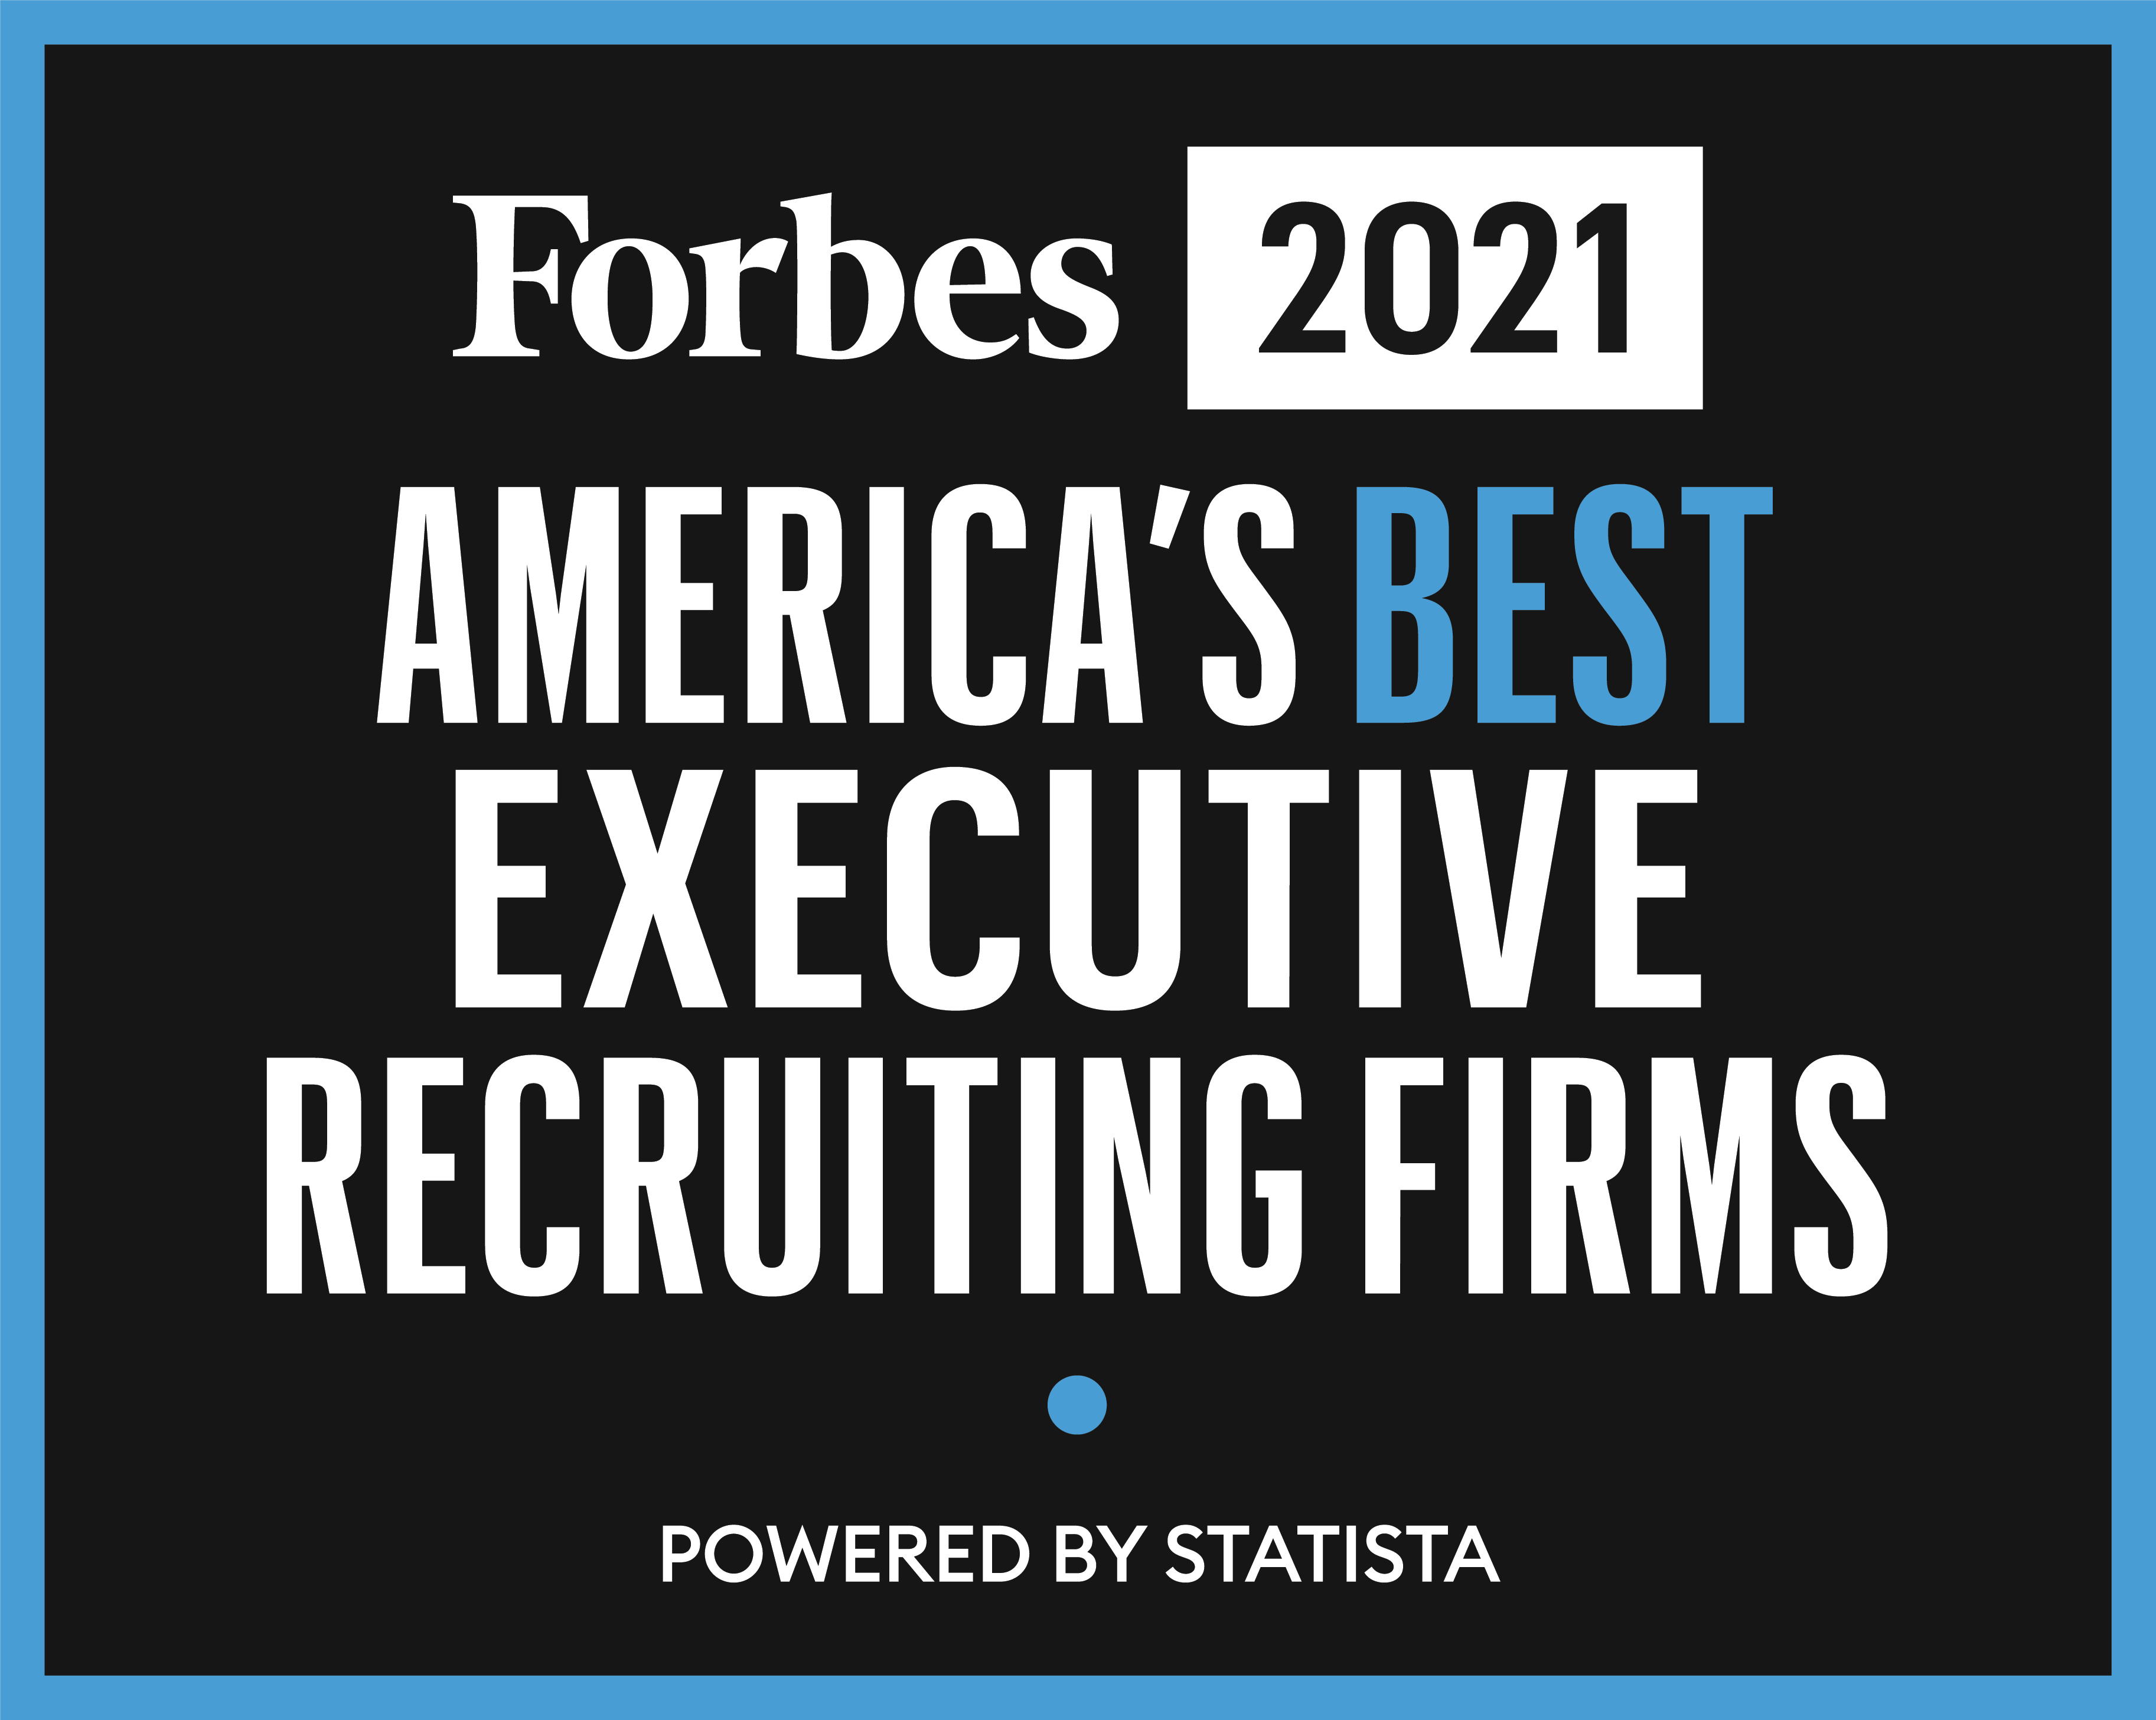 Forbes Americas Best Executive Search Firm!